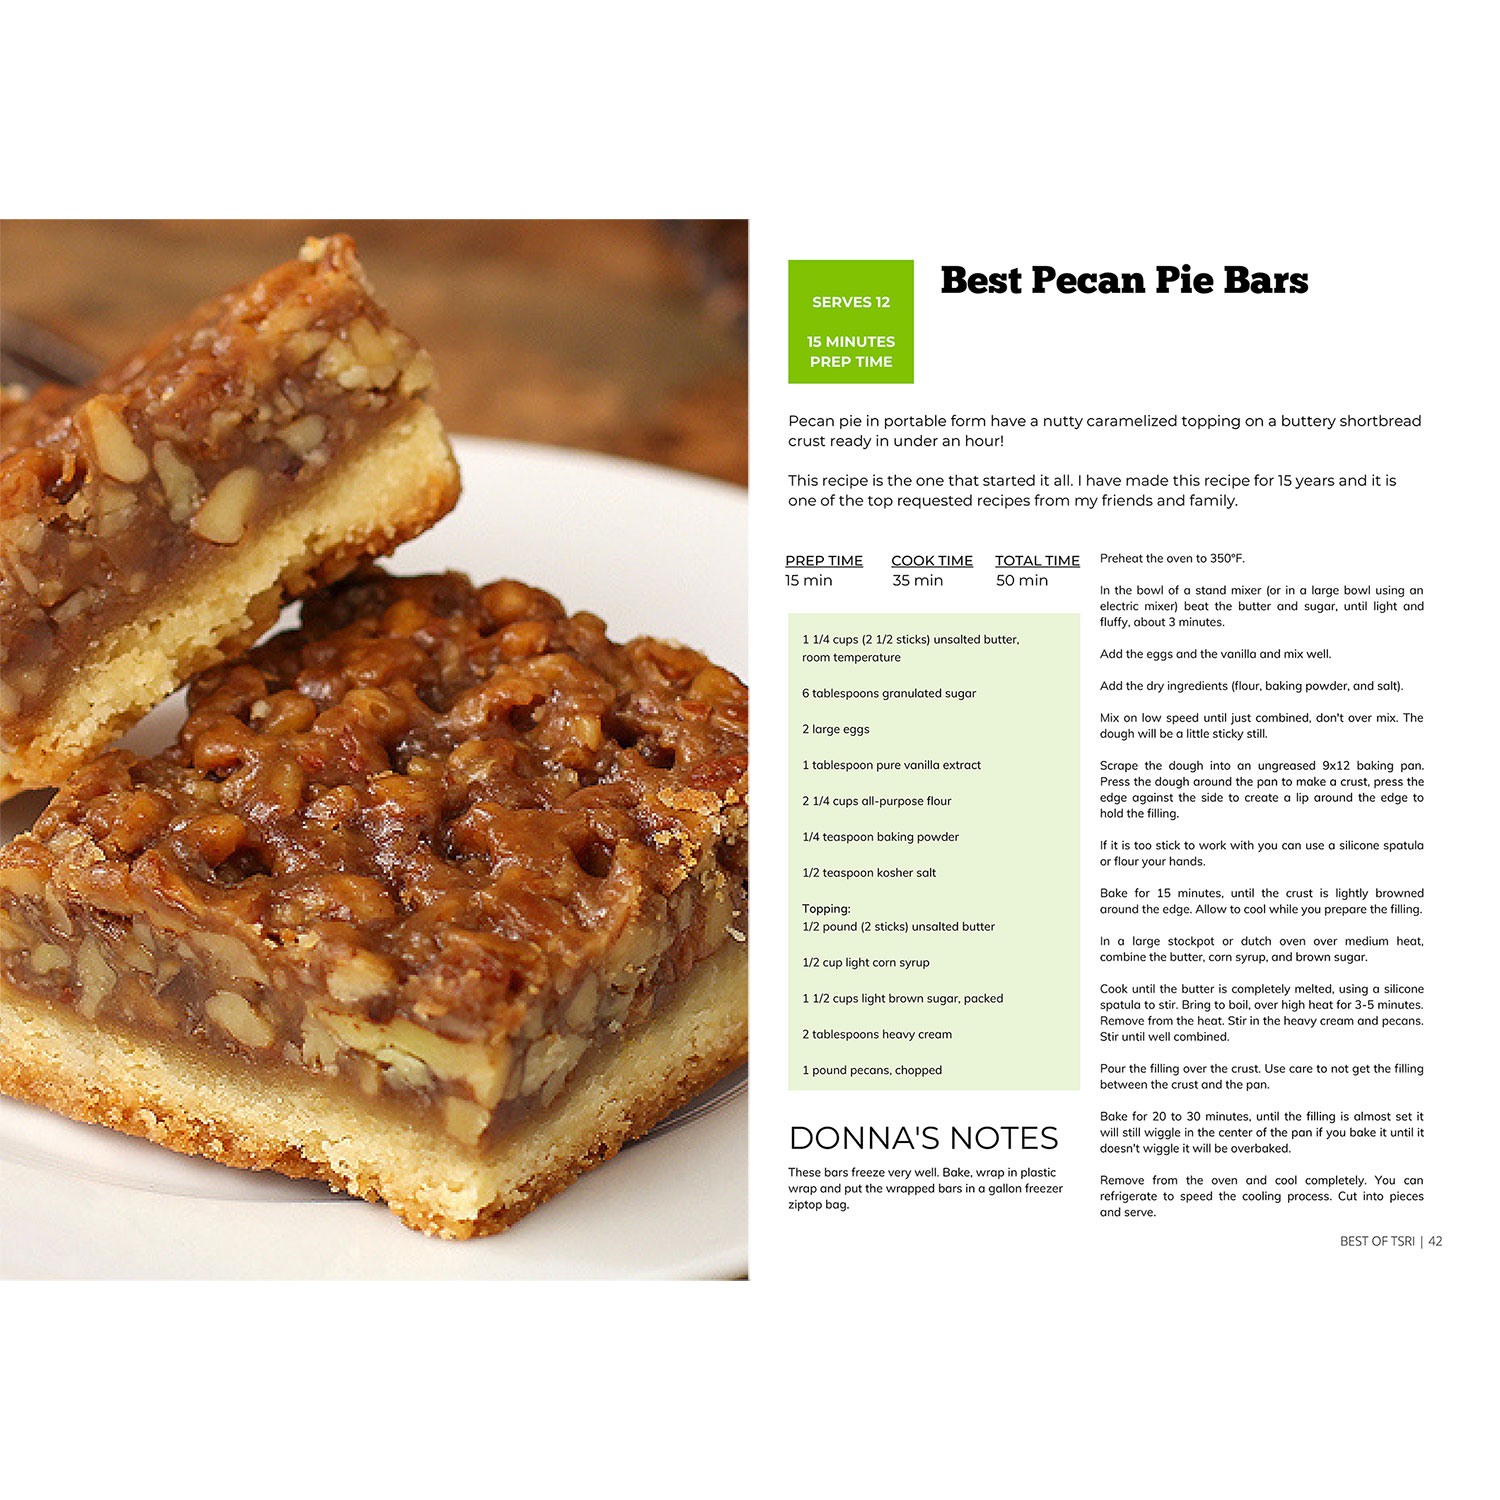 best of tsri - top 30 -pecan pie bars pages